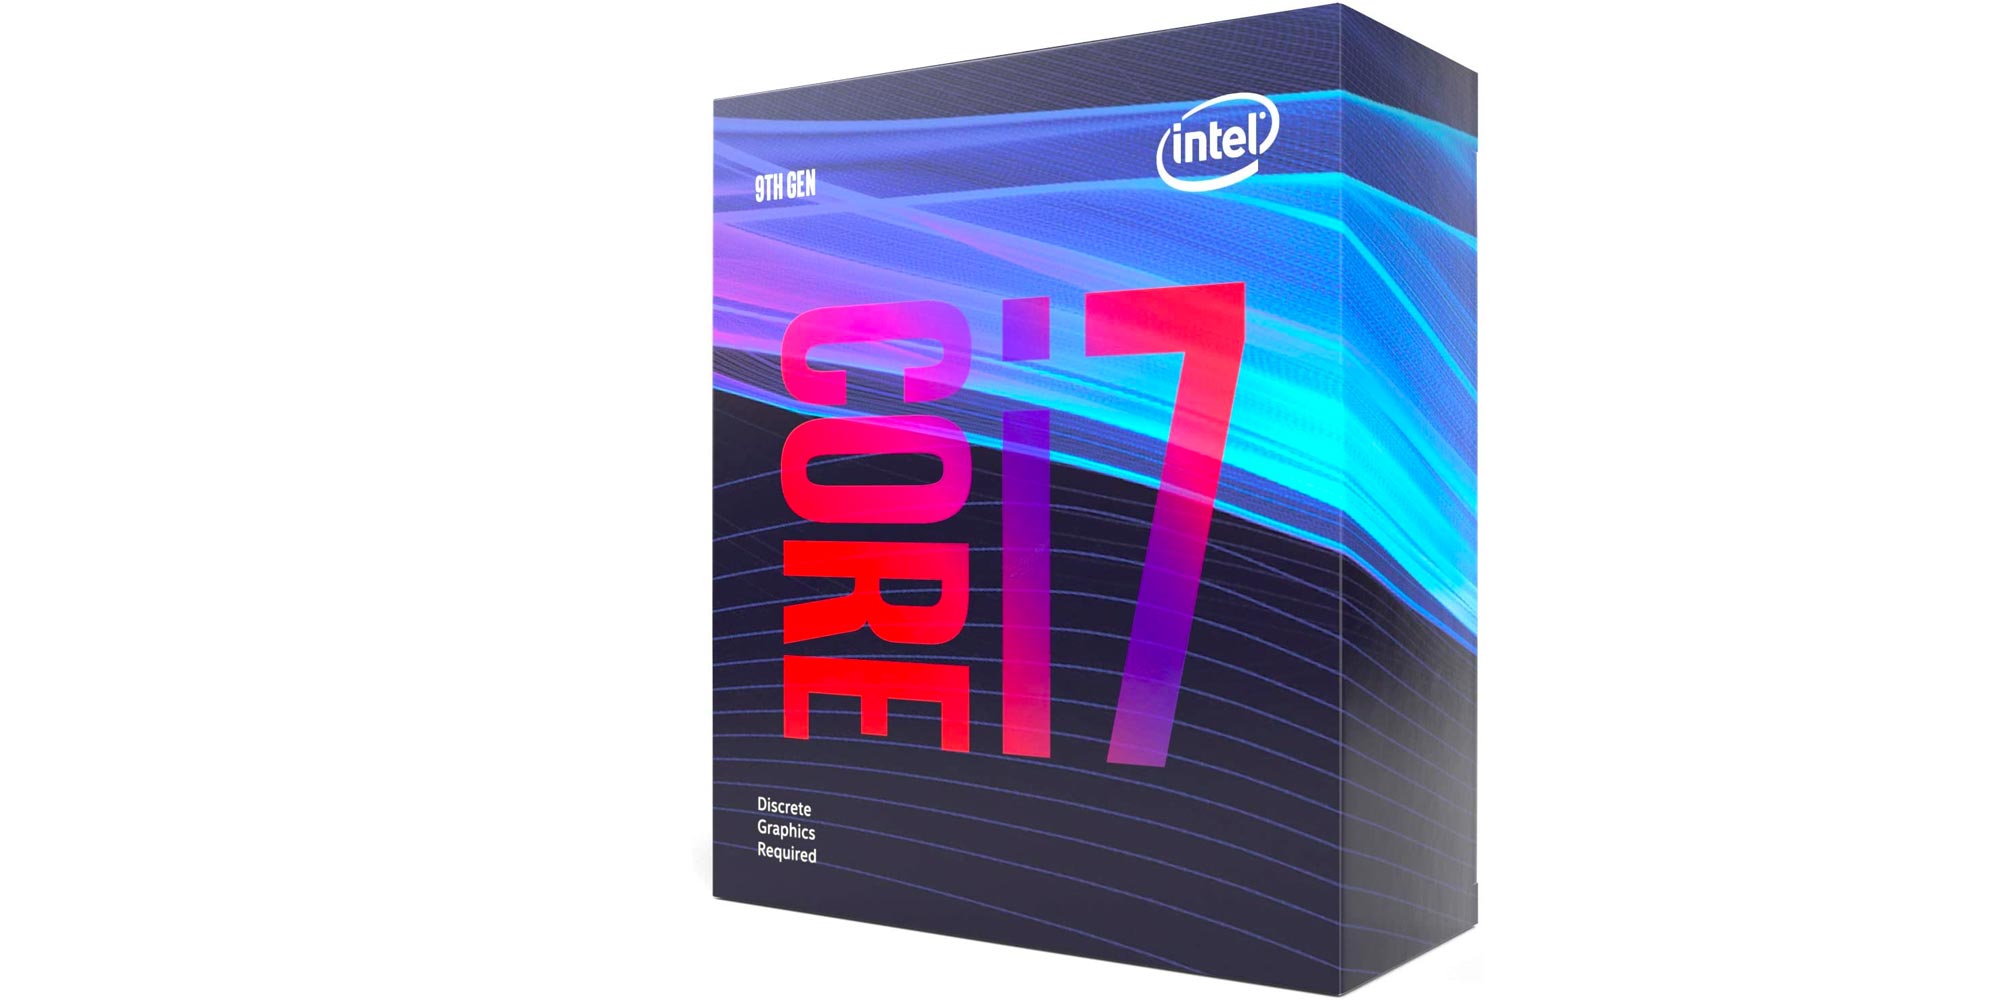 Start Your Pc Gaming Journey With The Intel I7 9700f 8 Core Cpu At An Amazon Low Of 210 9to5toys